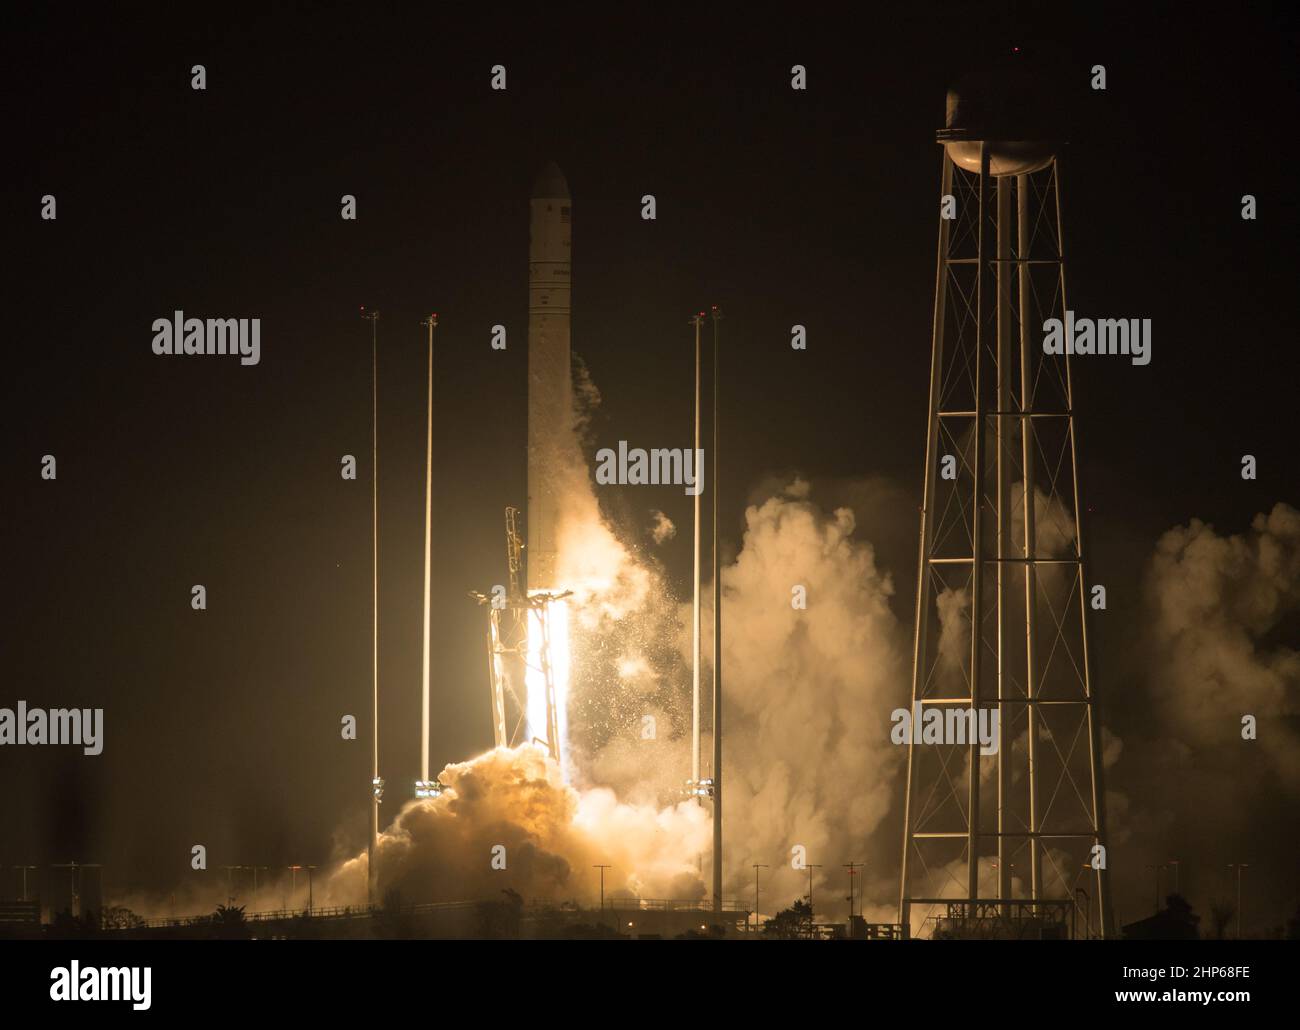 The Orbital ATK Antares rocket, with the Cygnus spacecraft onboard, launches from Pad-0A, Monday, May 21, 2018 at NASA's Wallops Flight Facility in Virginia. Stock Photo